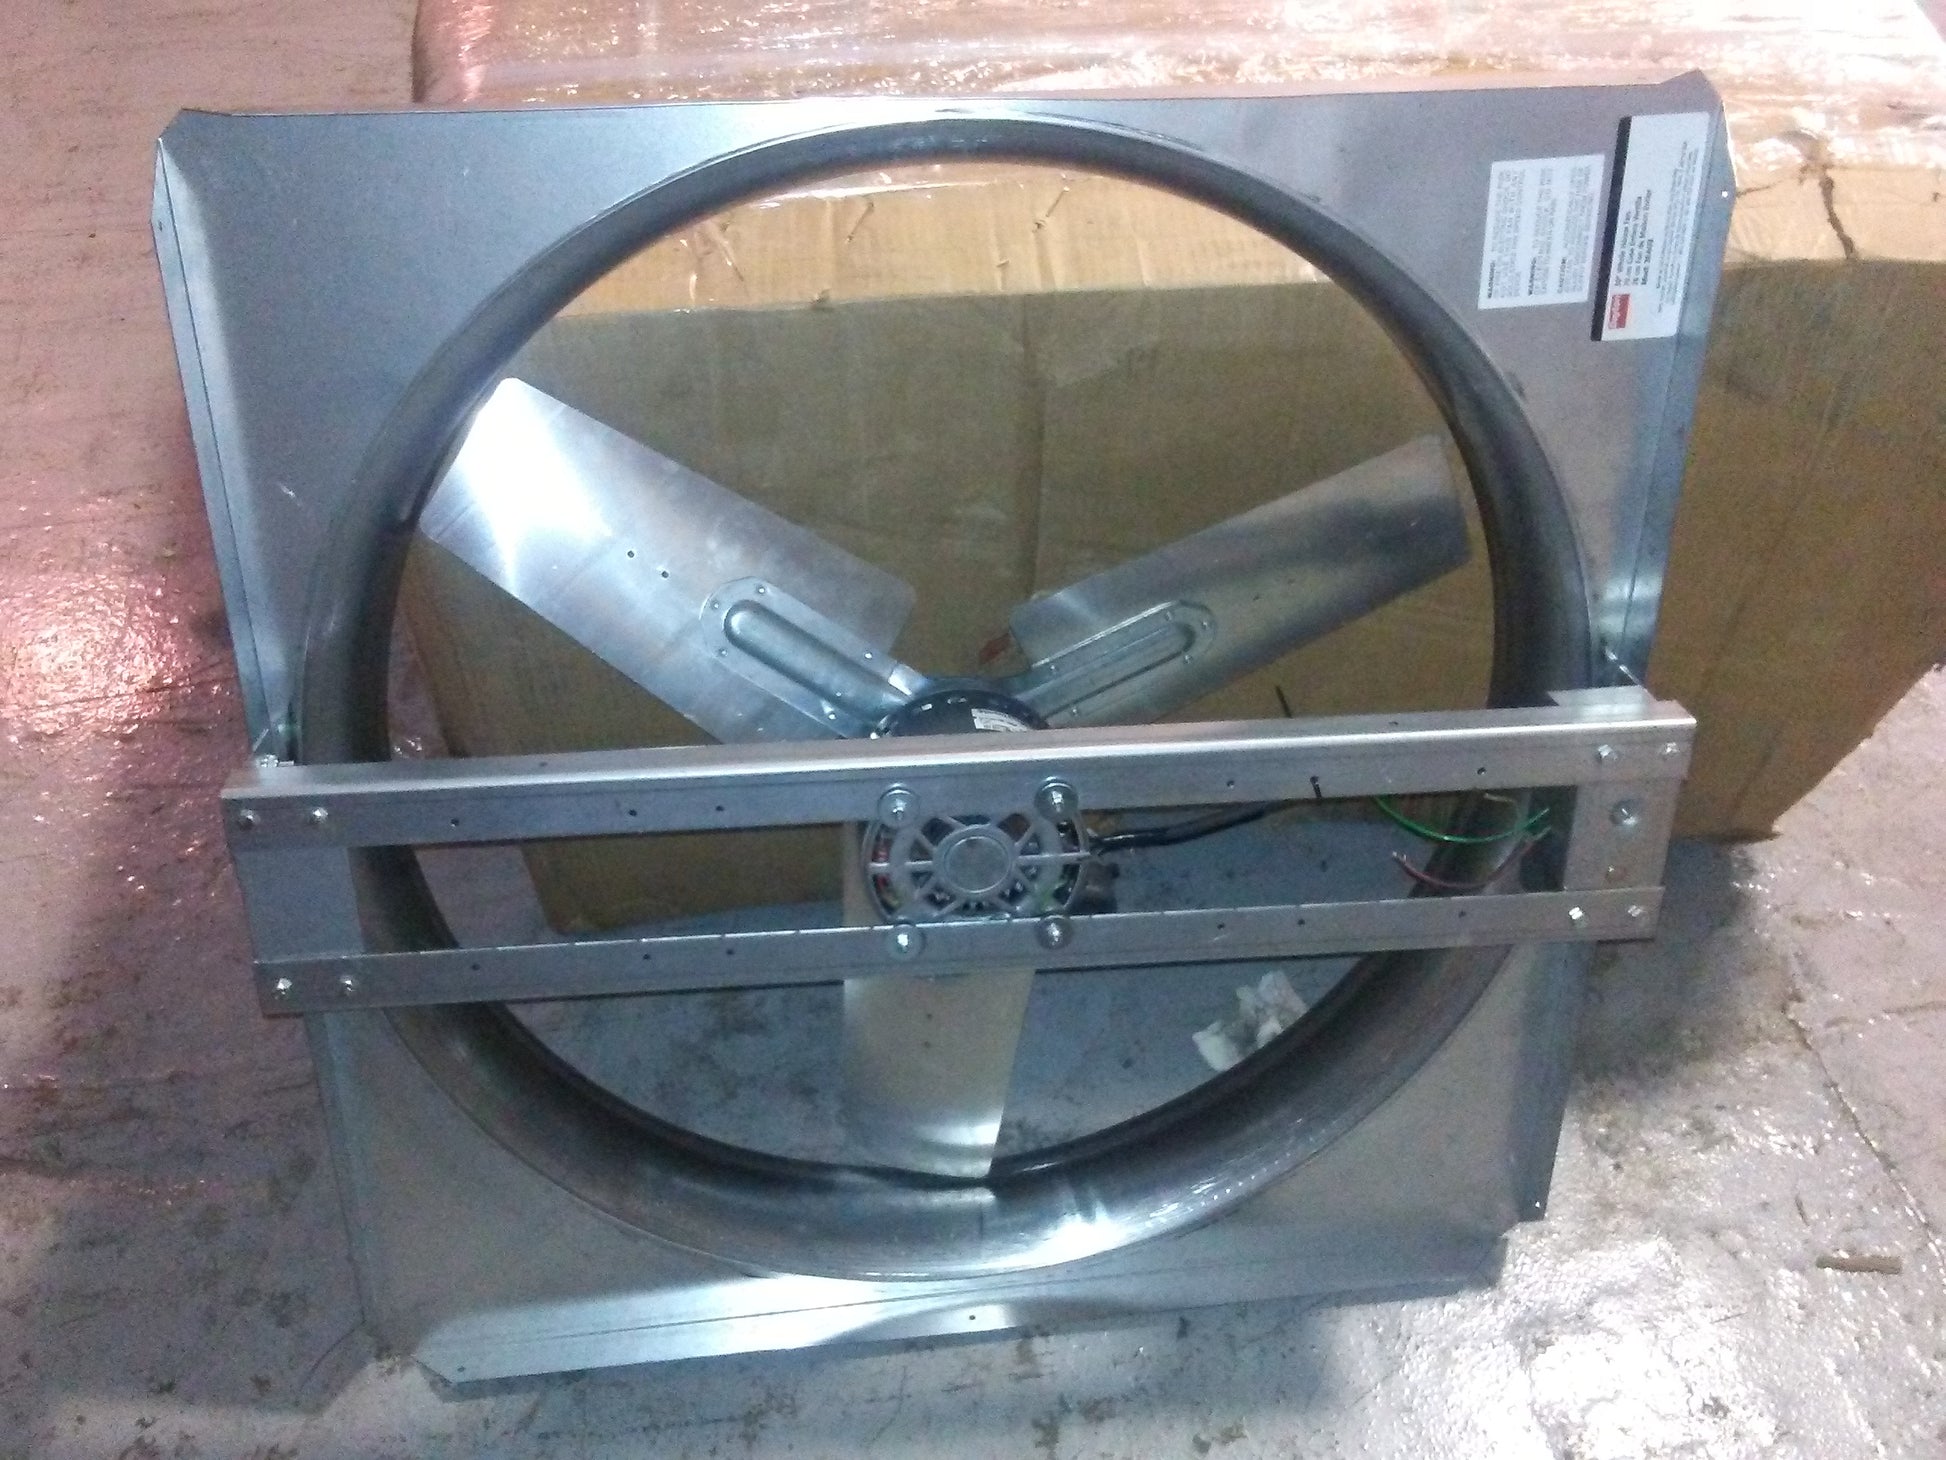 2-SPEED DIRECT DRIVE WHOLE HOUSE FAN, 30" BLADE DIA.